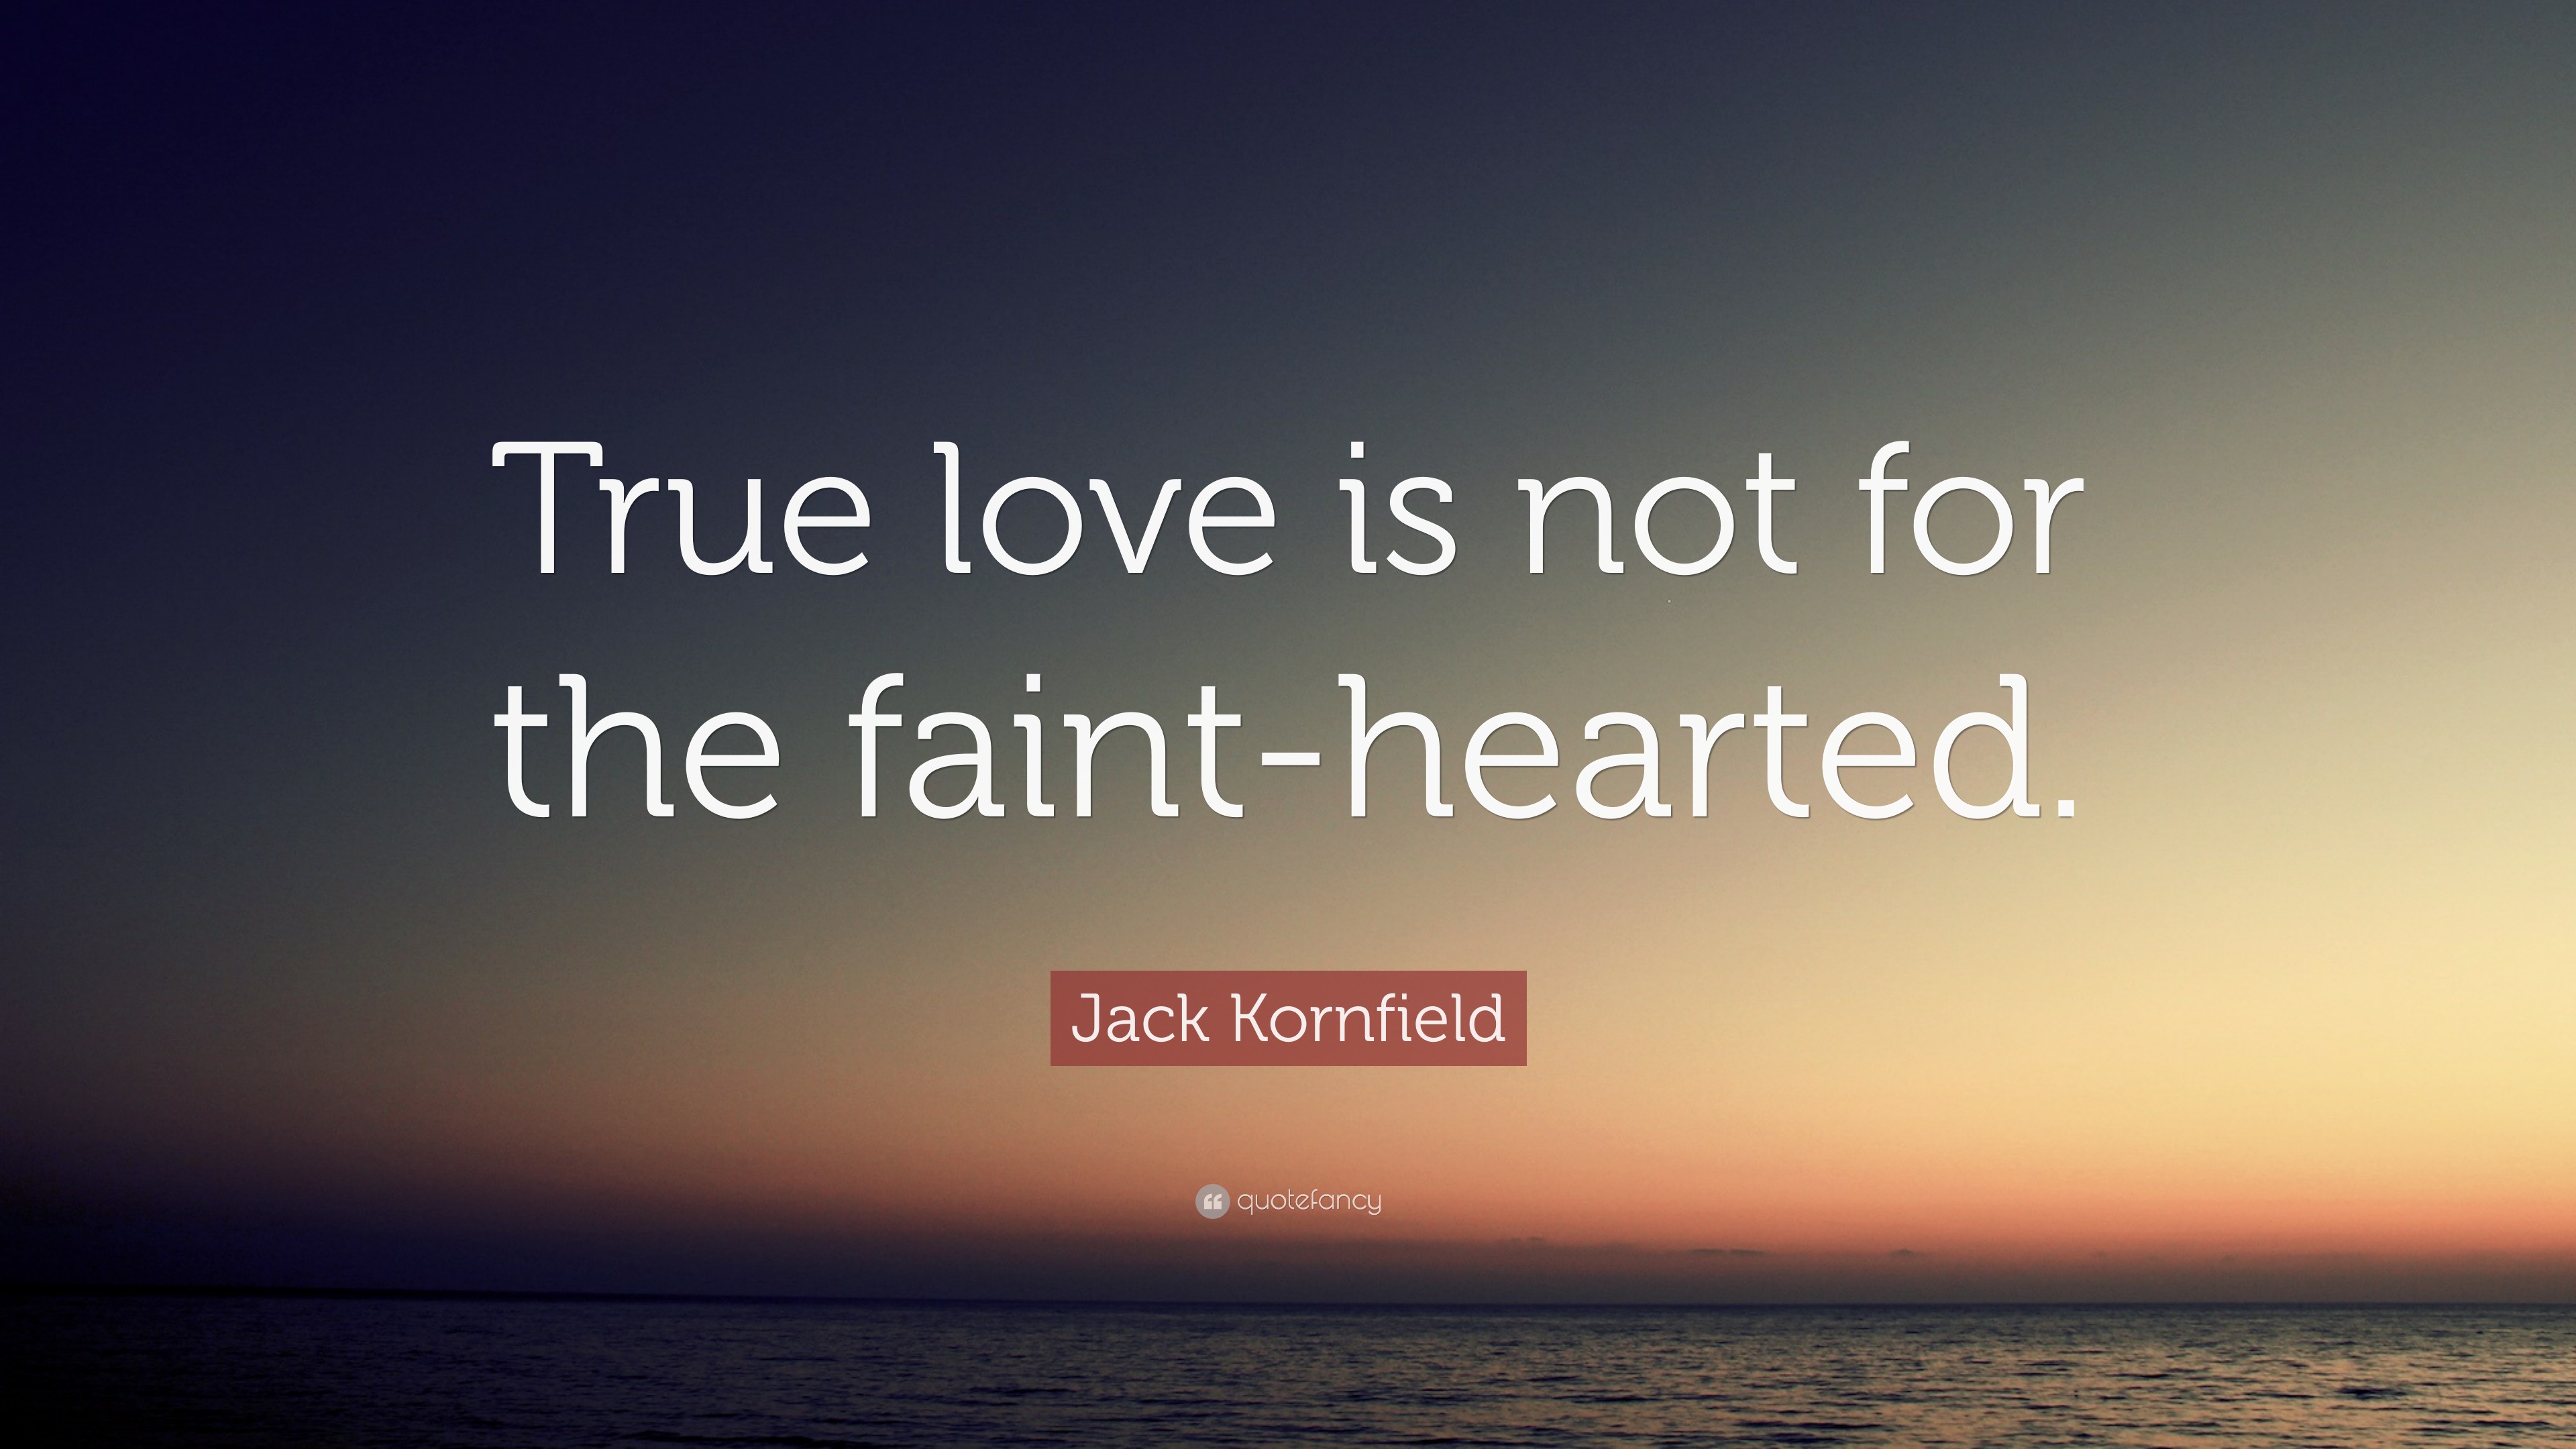 Jack Kornfield Quote: “True love is not for the faint-hearted.”